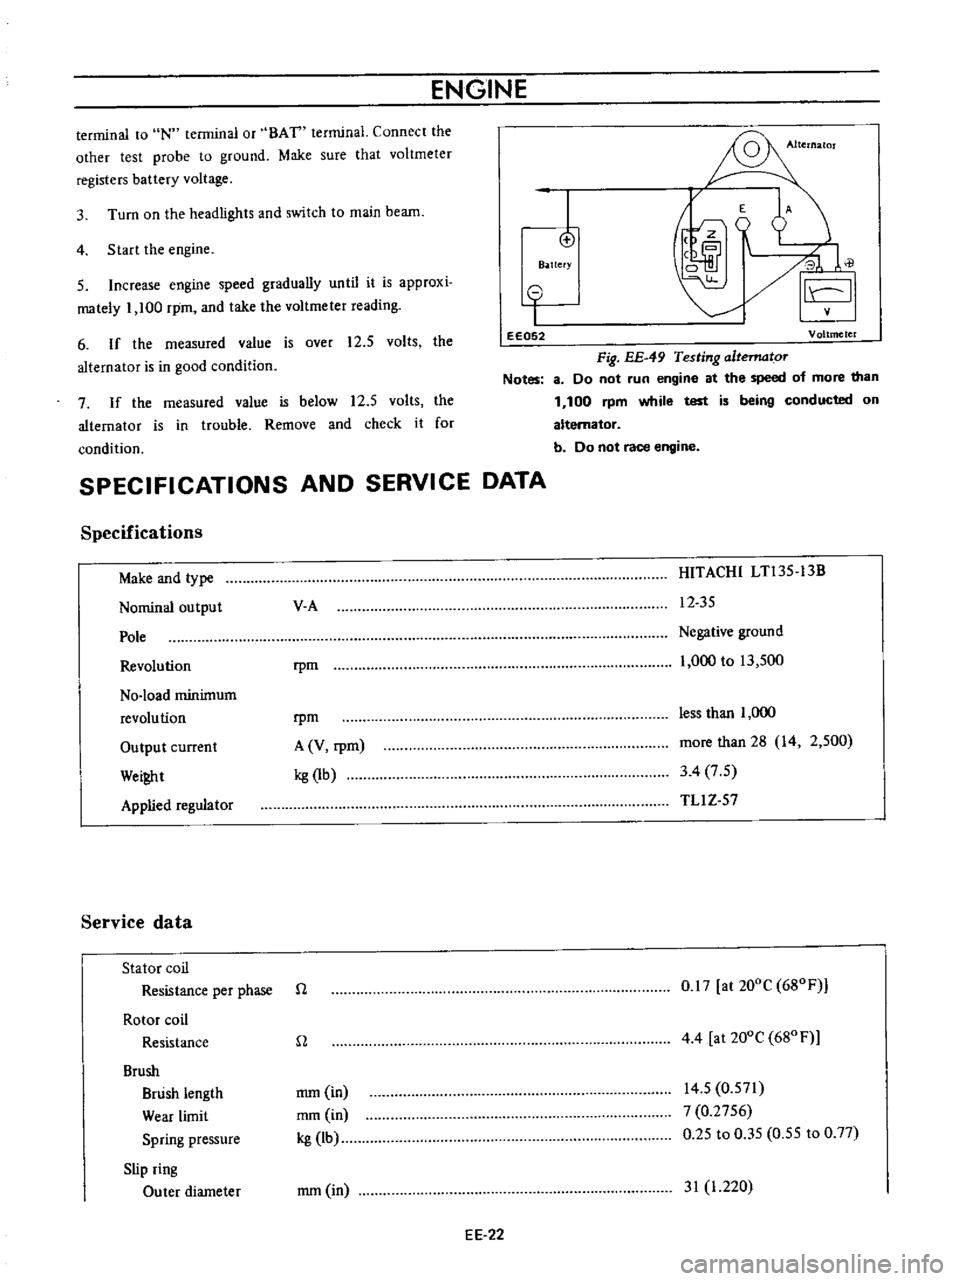 DATSUN B110 1973  Service Repair Manual 
ENGINE

terminal 
to 
IN 
terminal 
or 
BAT 
terminal 
Connect 
the

other 
test

probe 
to

ground 
Make 
sure 
that 
voltmeter

registers 
battery 
voltage

4 
Start 
the

engine
3 
Turn 
on

the 
